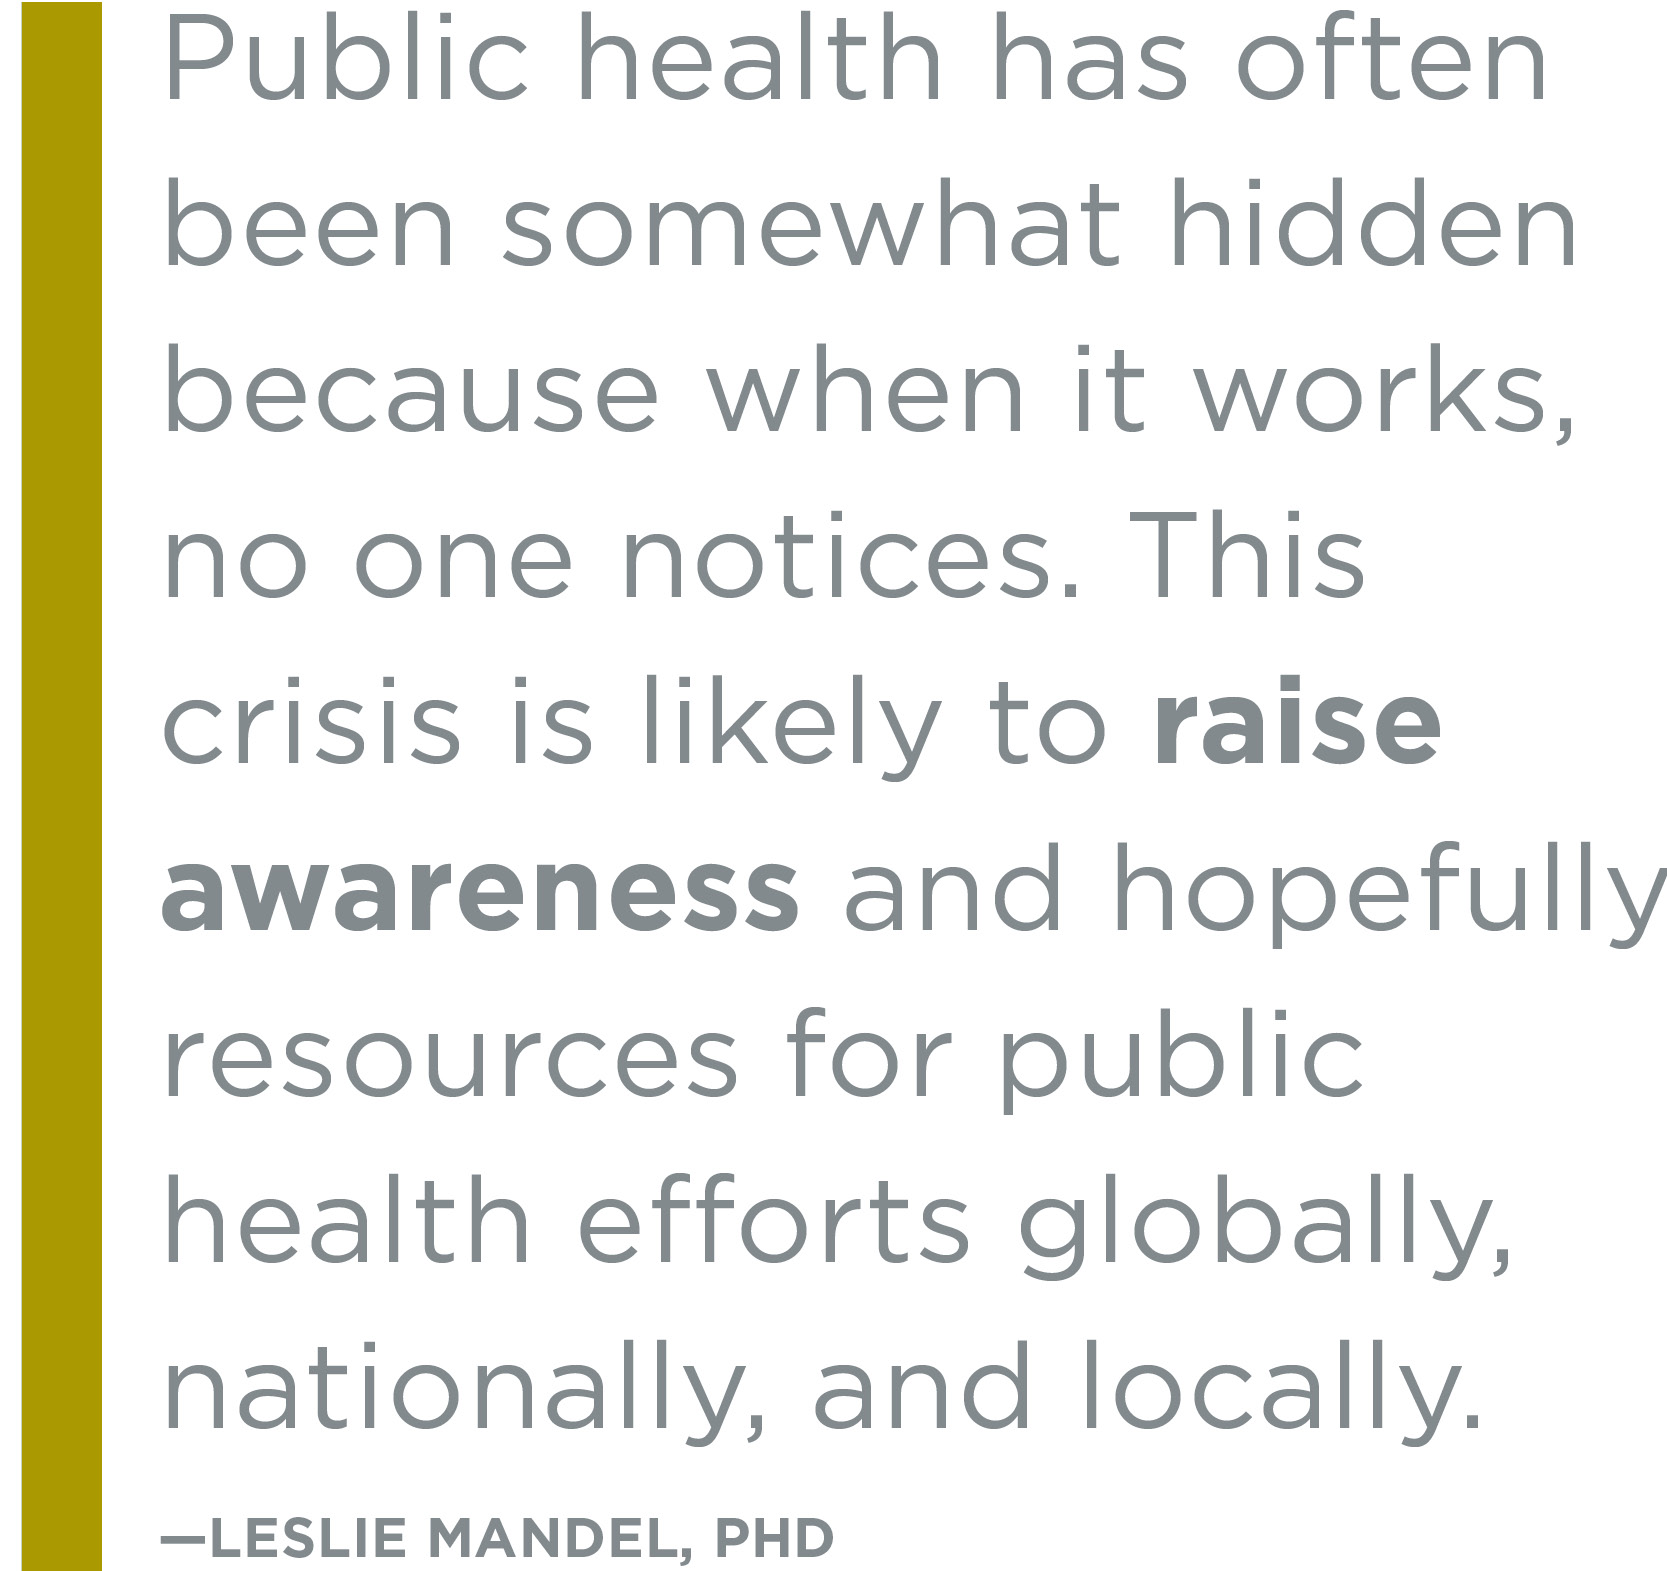 Public health has often been somewhat hidden because when it works, no one notices. This crisis is likely to raise awareness and hopefully resources for public health efforts globally, nationally, and locally.”